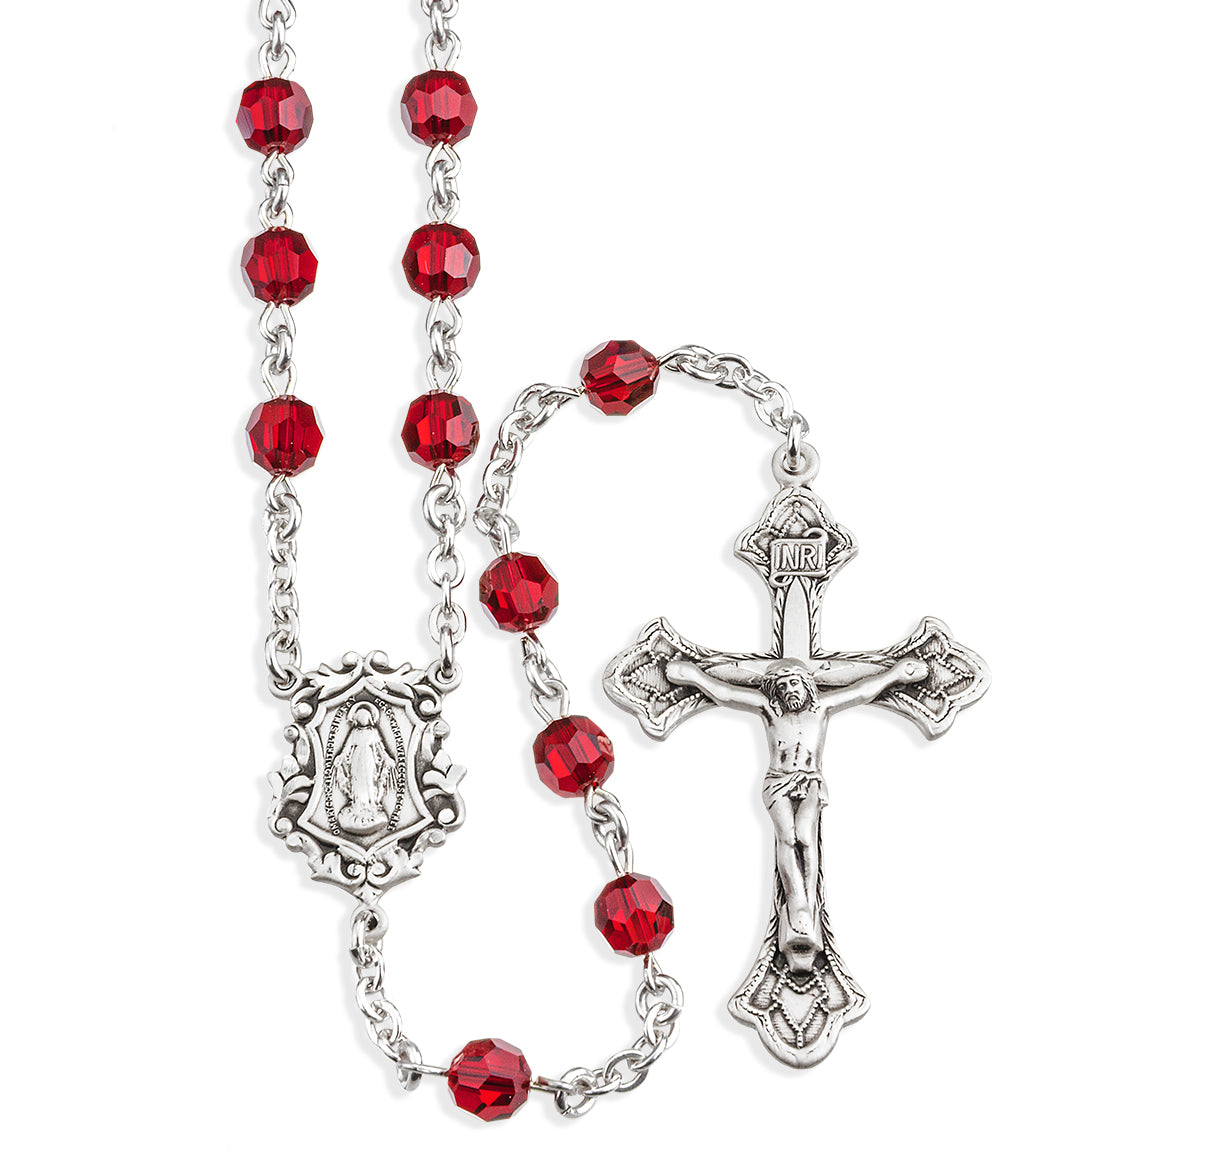 Rosary Sterling Crucifix and Centerpiece Created with Swarovski Crystal 6mm Faceted Round Ruby Beads by HMH